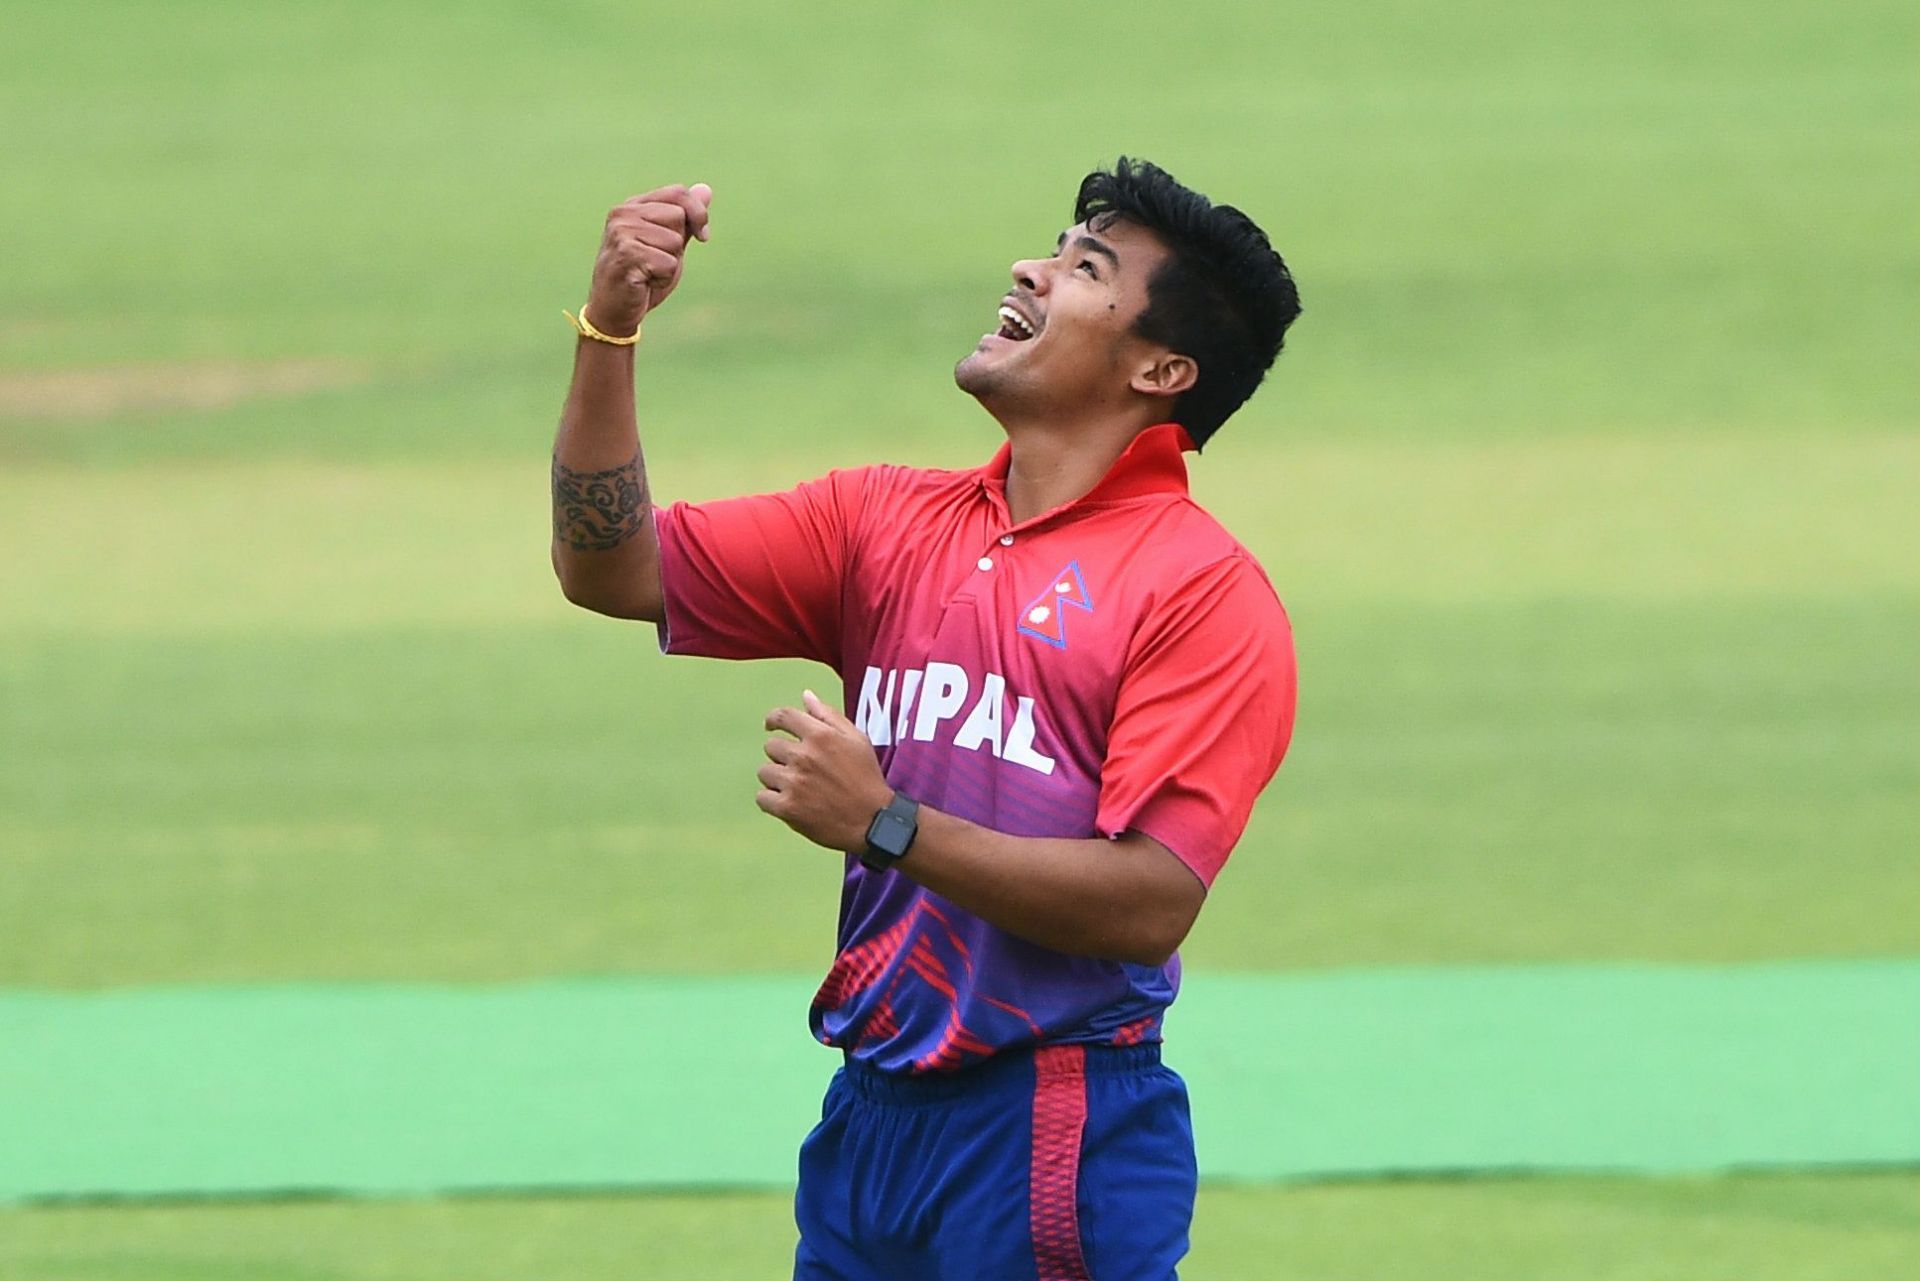 Karan KC was one of the star seamers for Nepal in the World Cup qualifiers. [P/C: ICC]